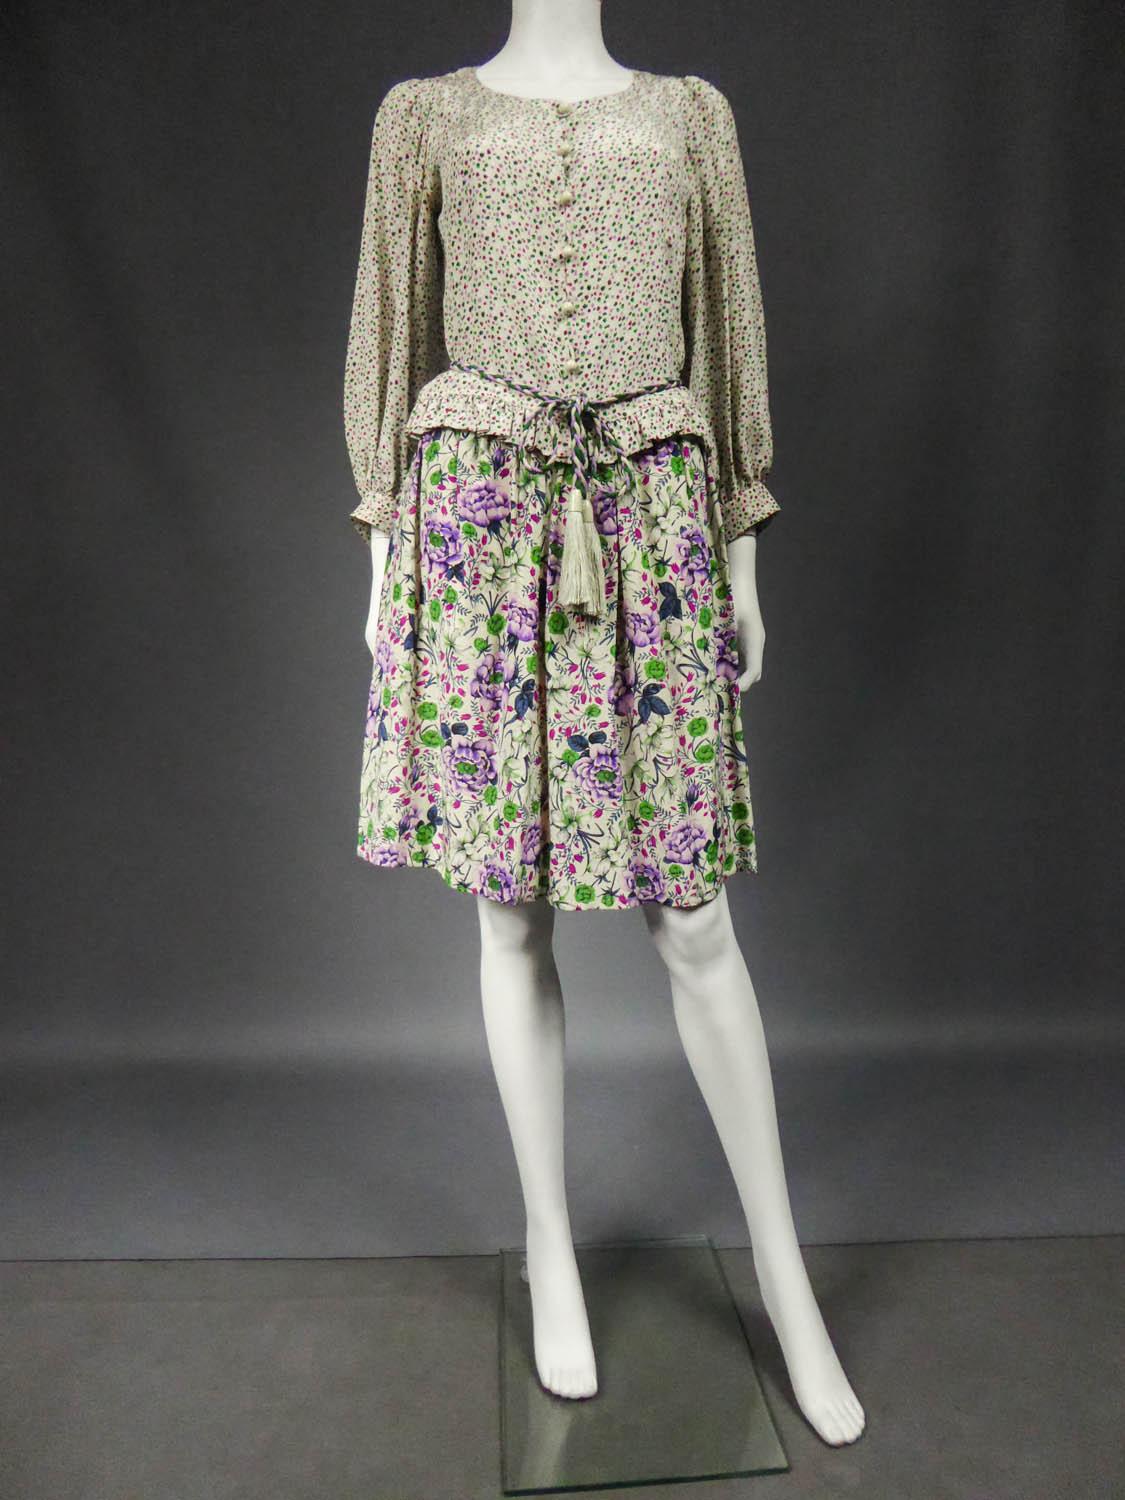  A French Ungaro Parallele Skirt Blouse and Belt Set - Circa 1978 / 1980 For Sale 1